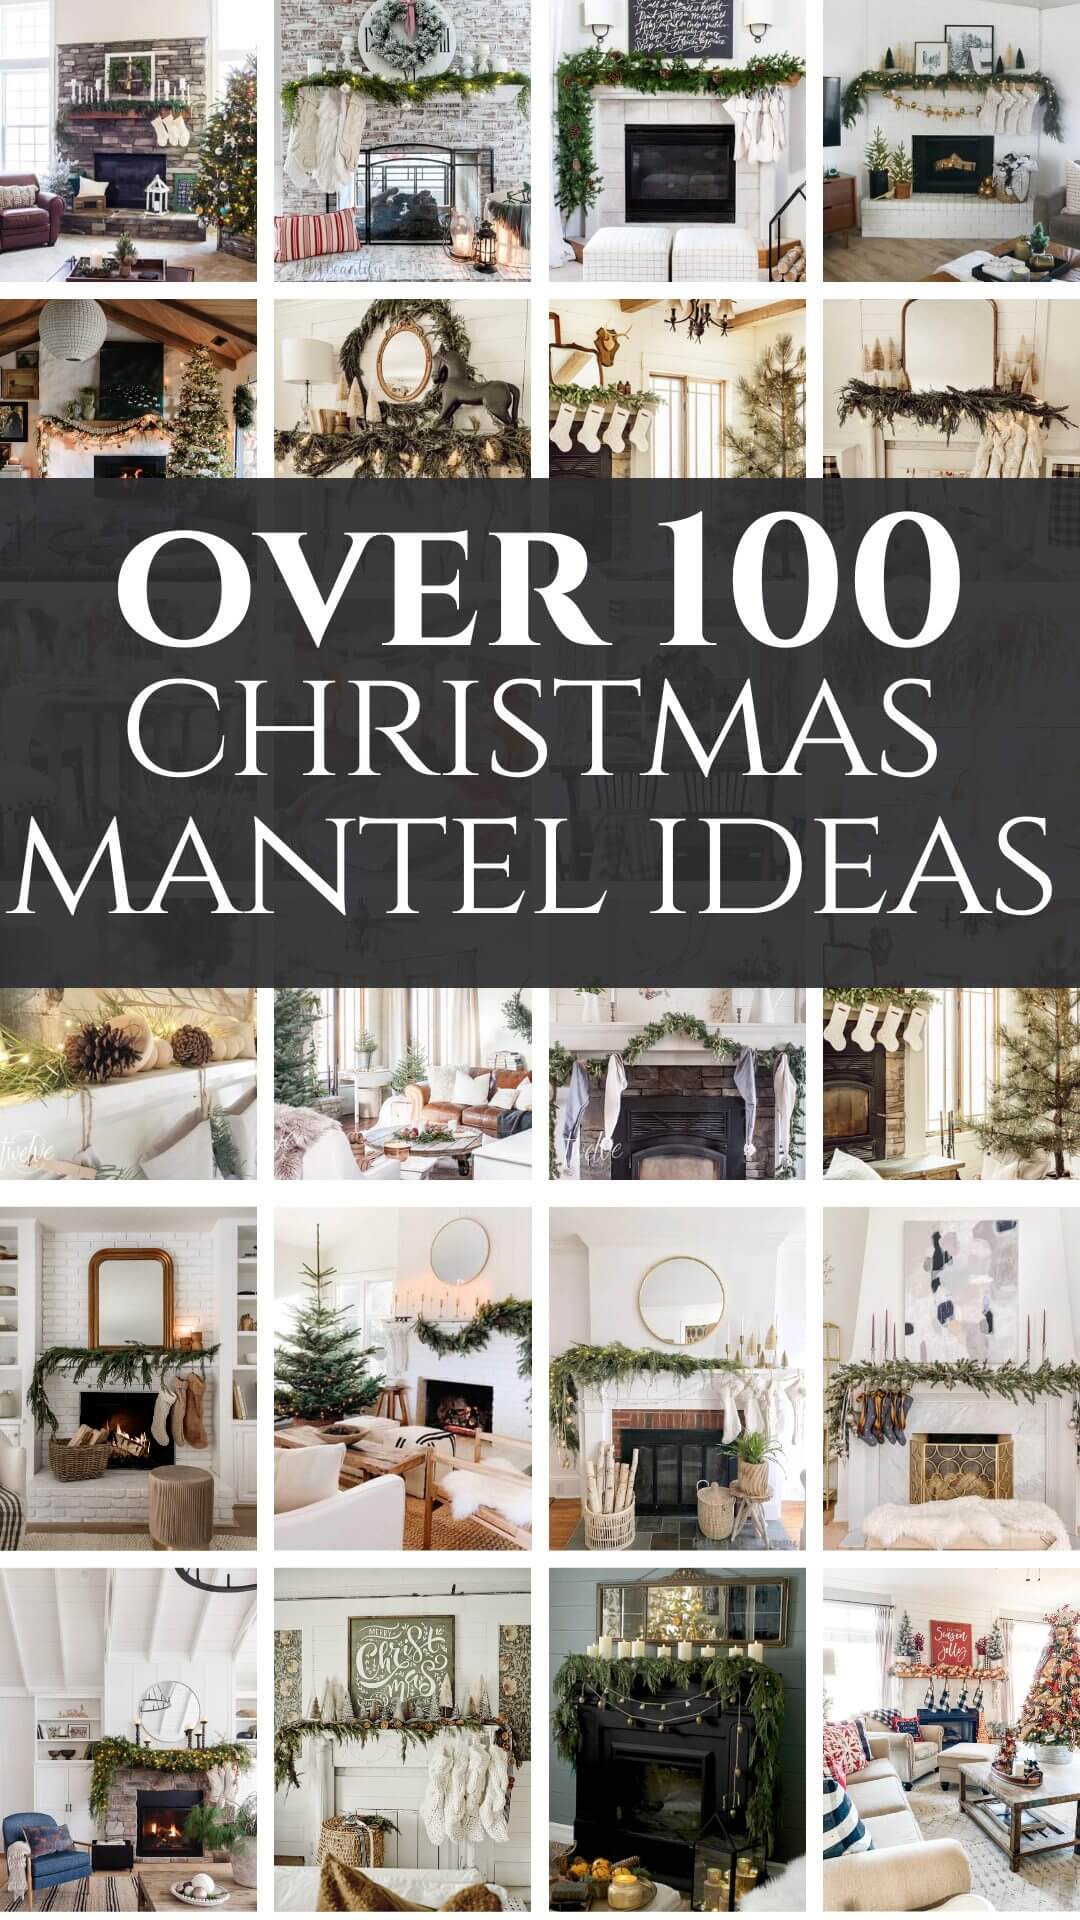 Over 100 fireplace Christmas decor ideas perfect for your home. I am sharing Christmas mantel decor in all its styles too! Click here to see tons of ideas, resources and inspiration!